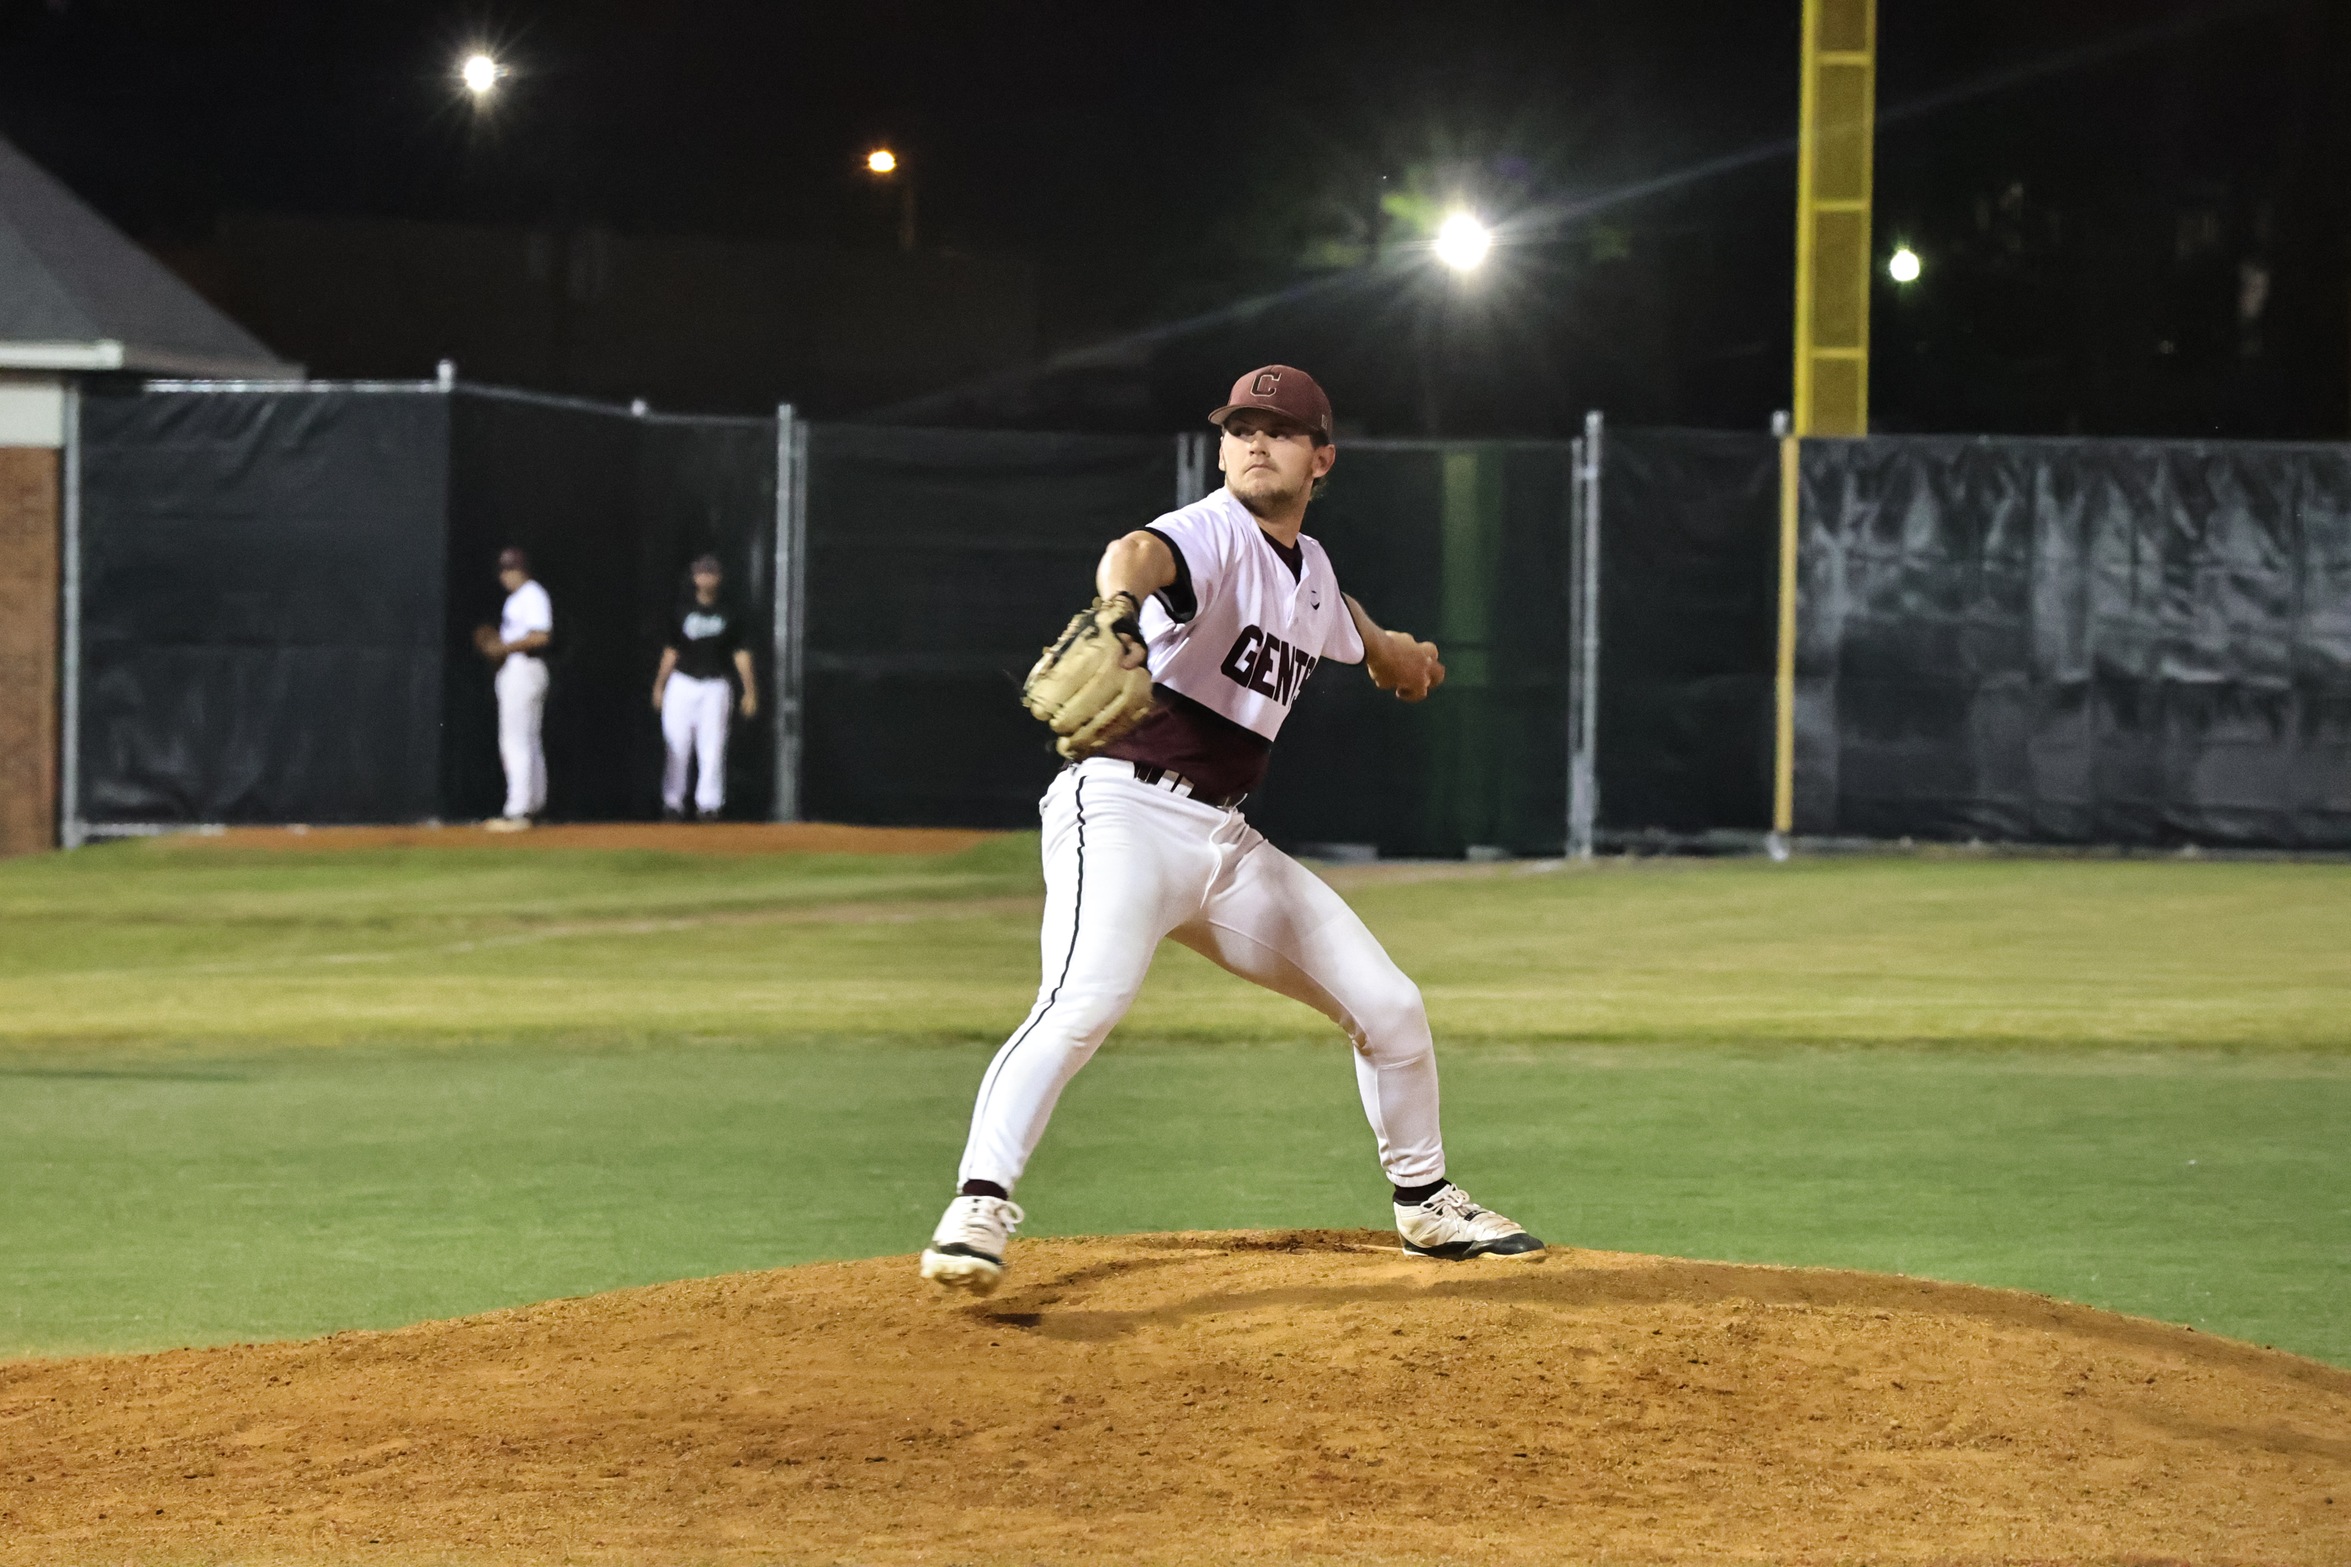 Sophomore LHP Cody Myers tossed his second-straight complete game in Friday's 5-1 win.